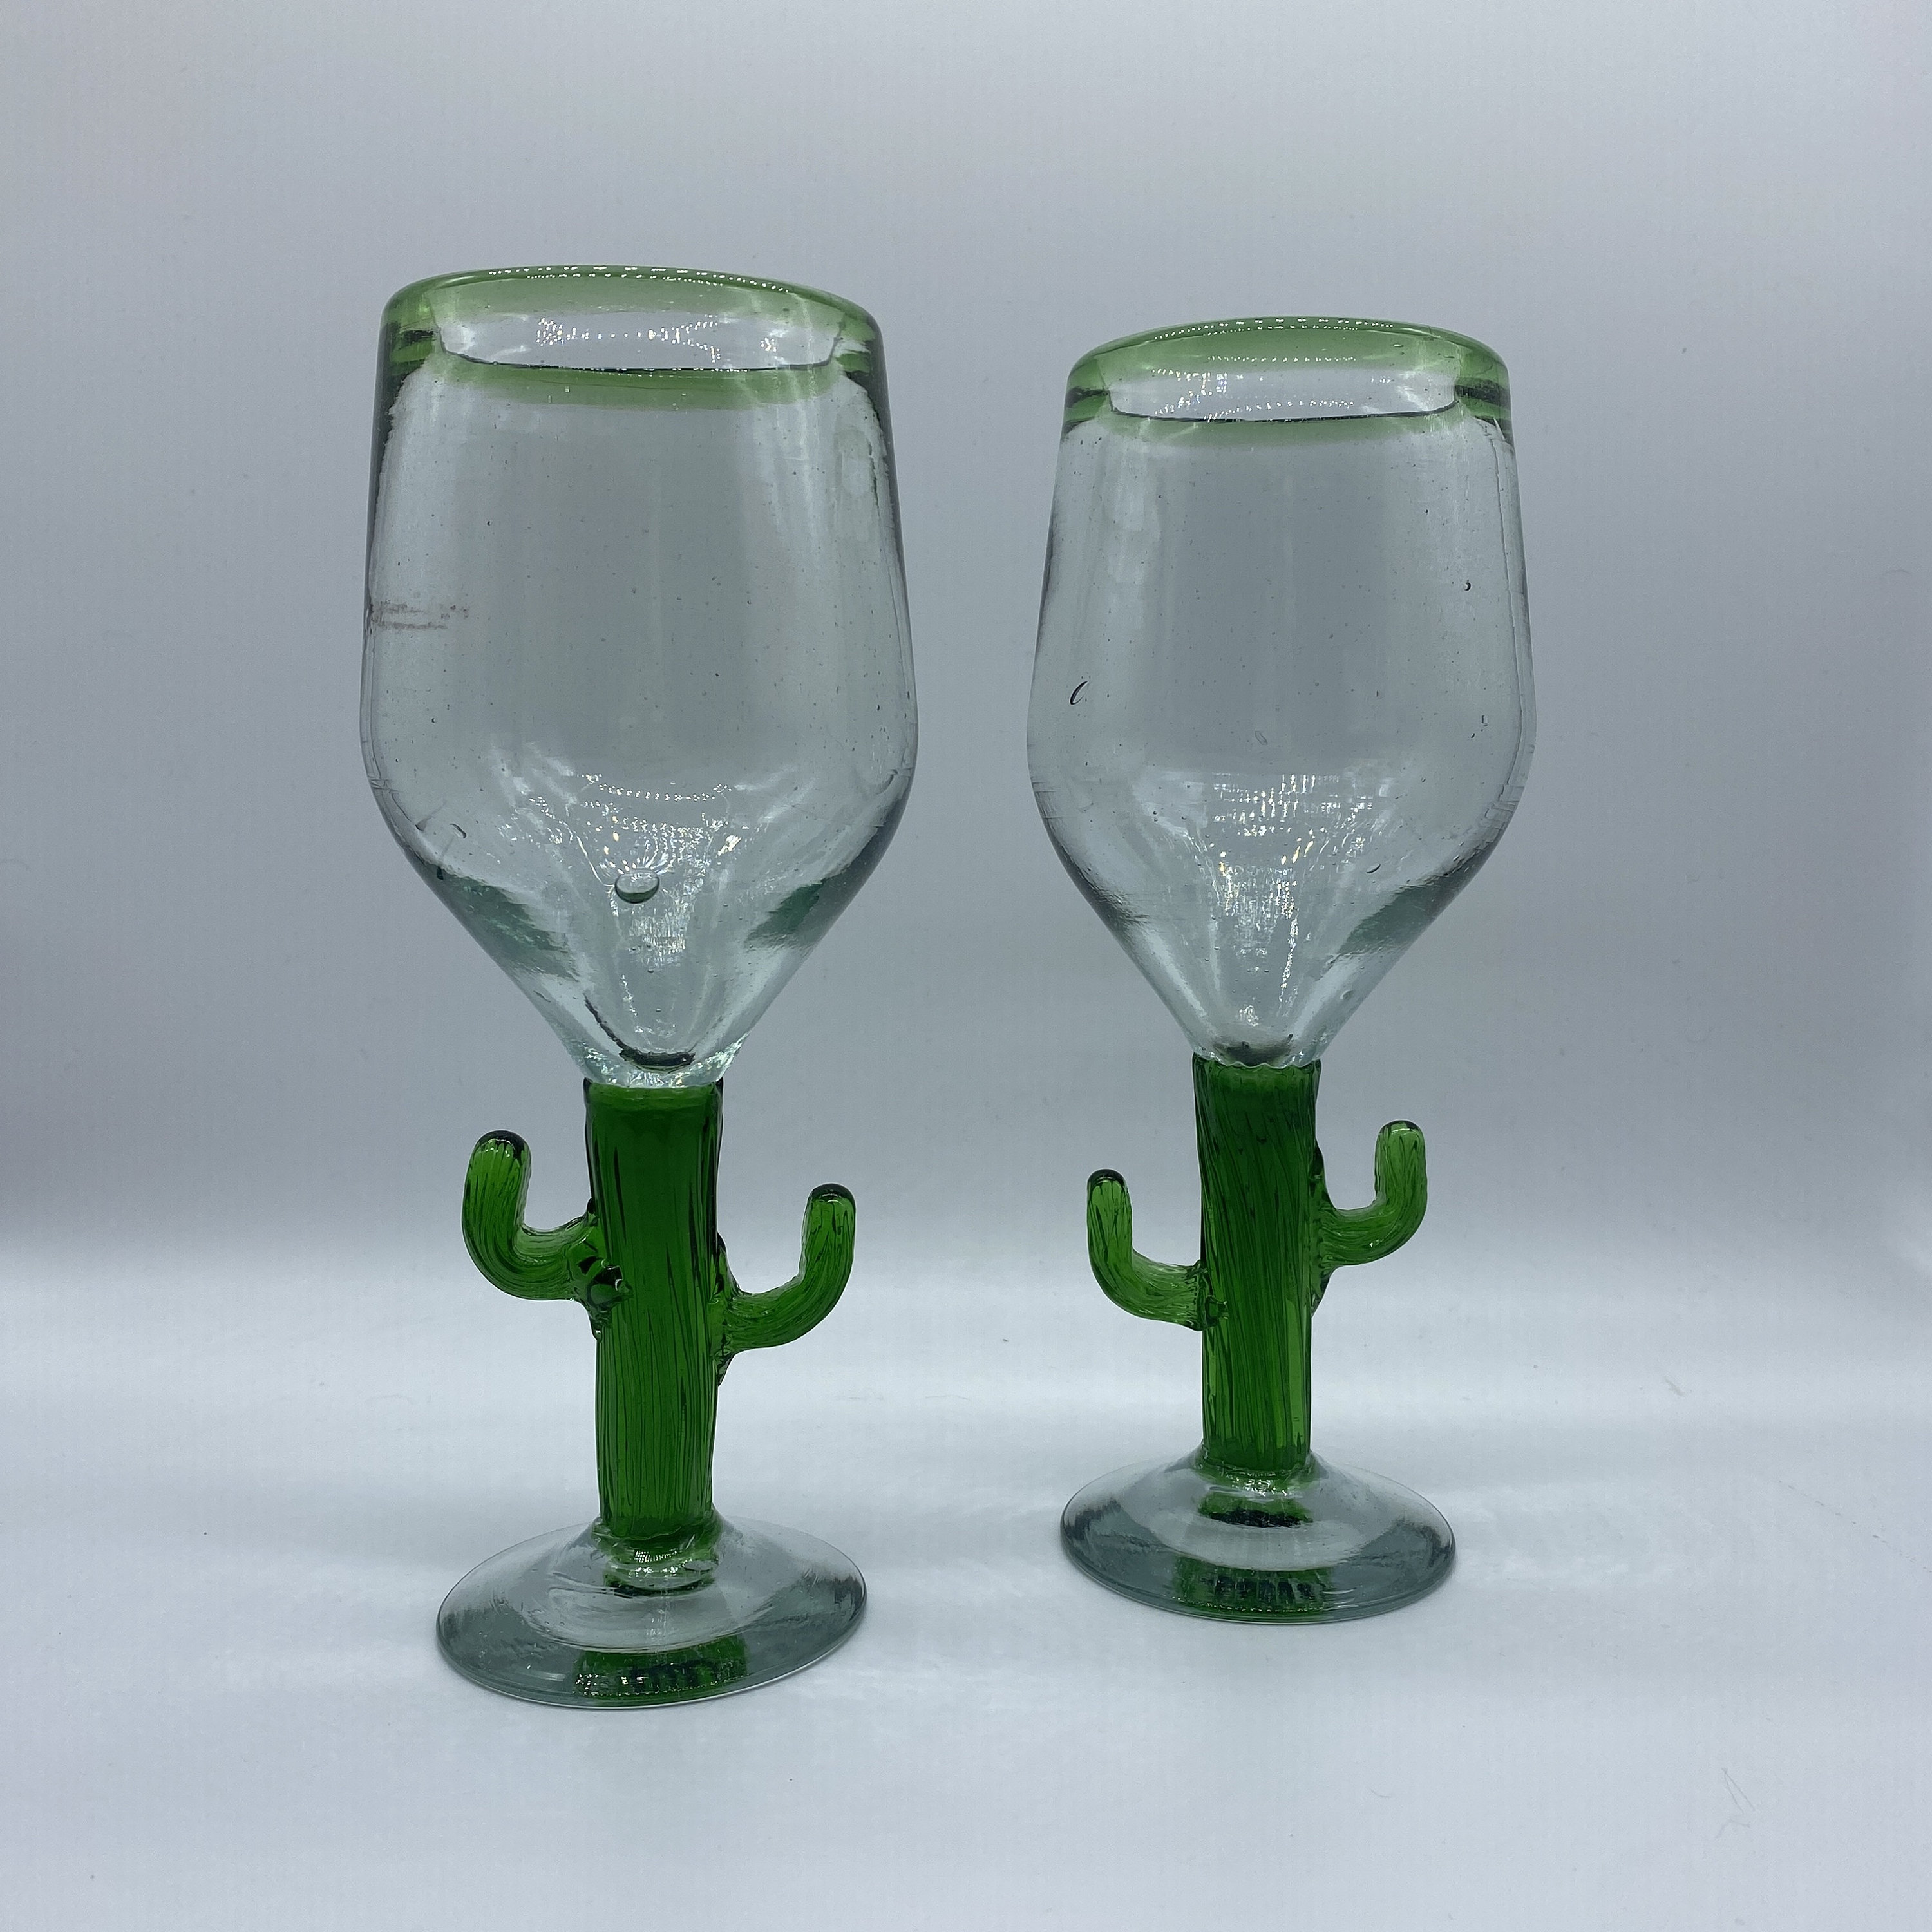 Cactus Stacking Glasses Set of 6 Handmade Cocktail Glassware Green Glass  Saguaro Mid Century Drinking Cups Gift Set by Gökotta 